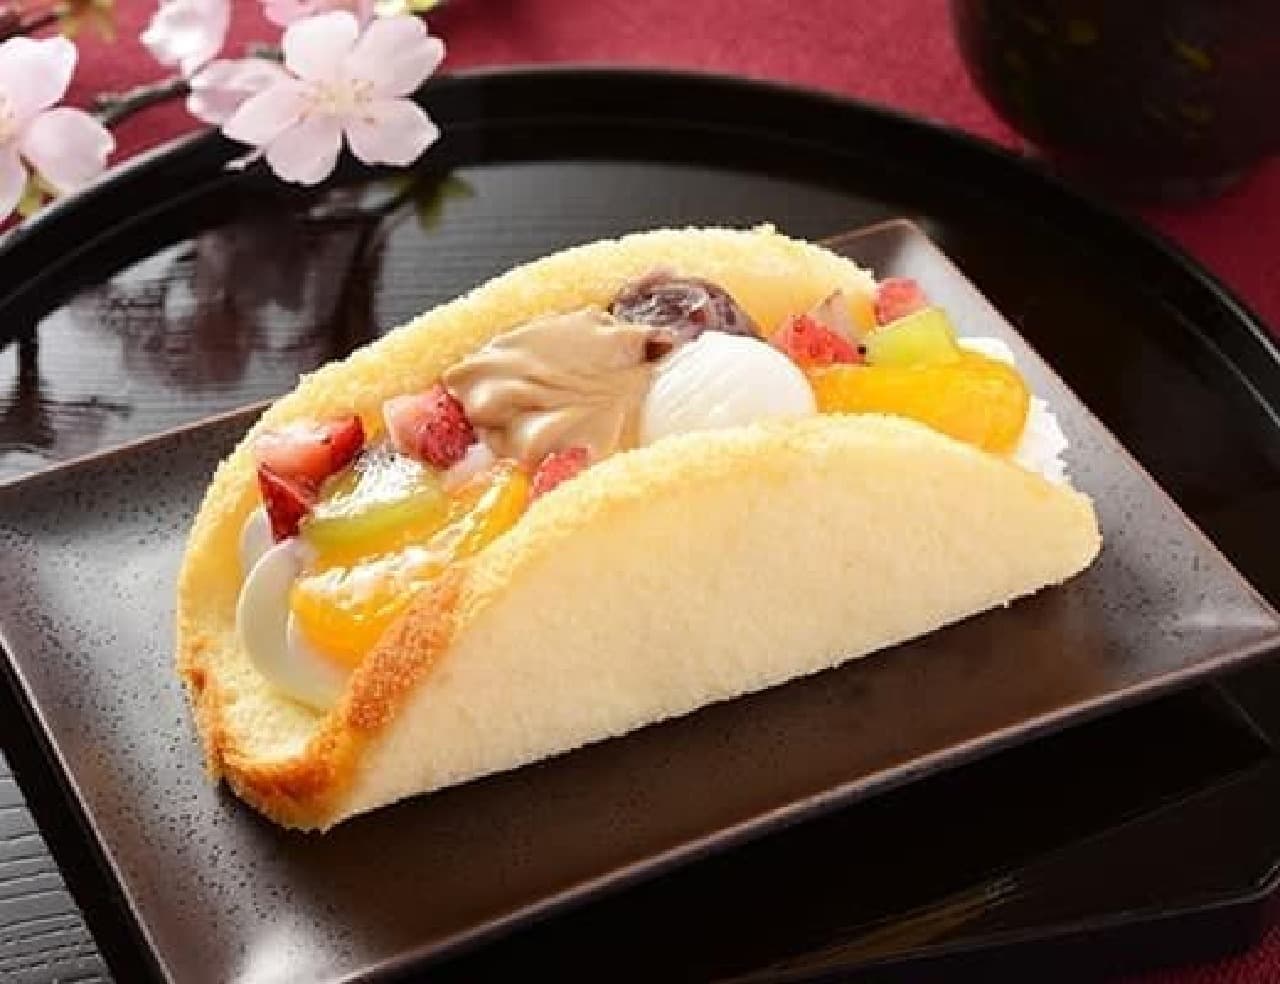 Lawson "KanColle" management guardian office x Lawson harbor Mamiya's fluffy anmitsu-style omlet